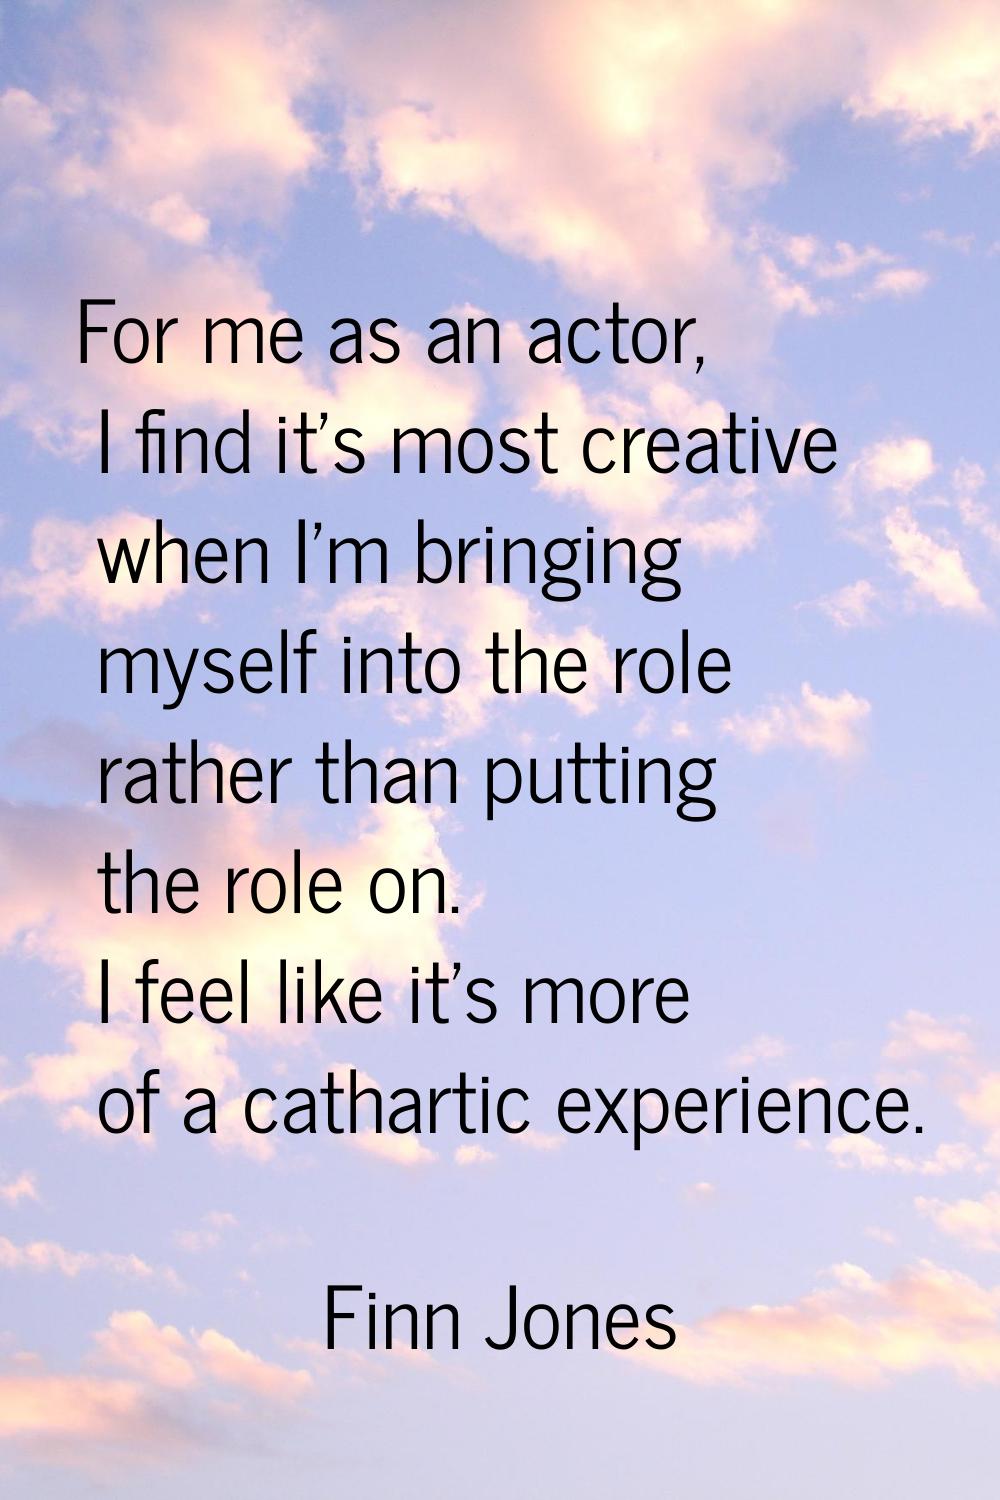 For me as an actor, I find it's most creative when I'm bringing myself into the role rather than pu